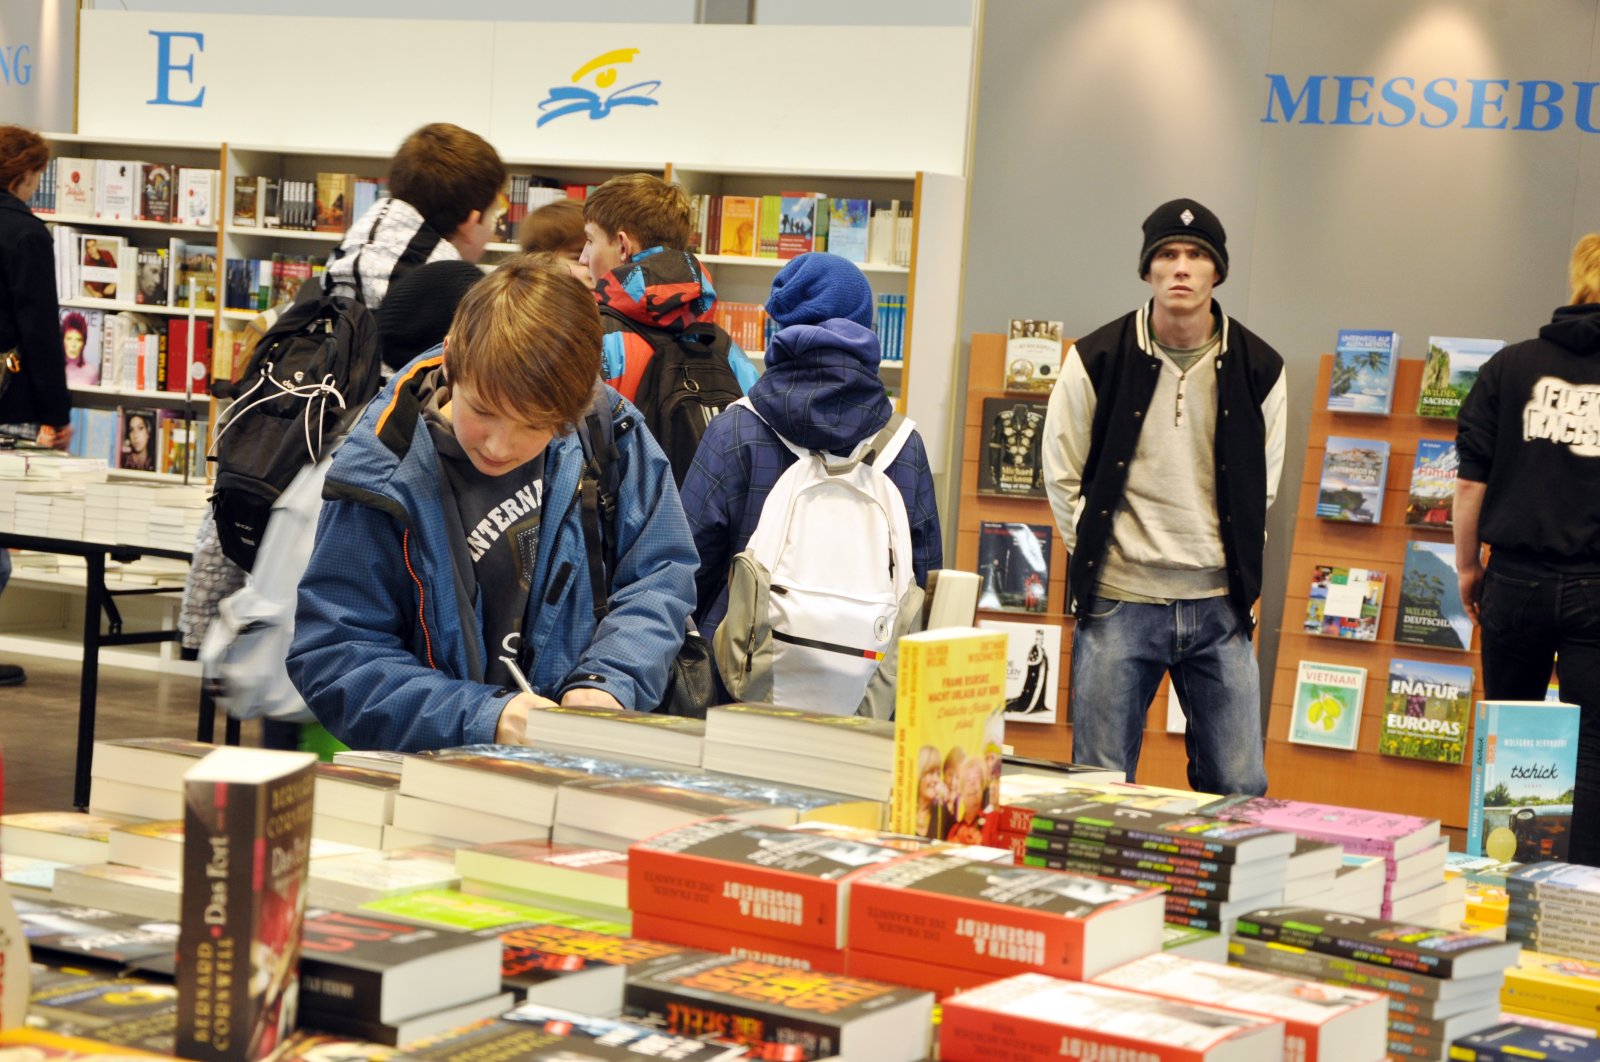 People are seen during a public day for Leipzig Book Fair in Leipzig, Germany, March 15, 2013. (Shutterstock Photo)